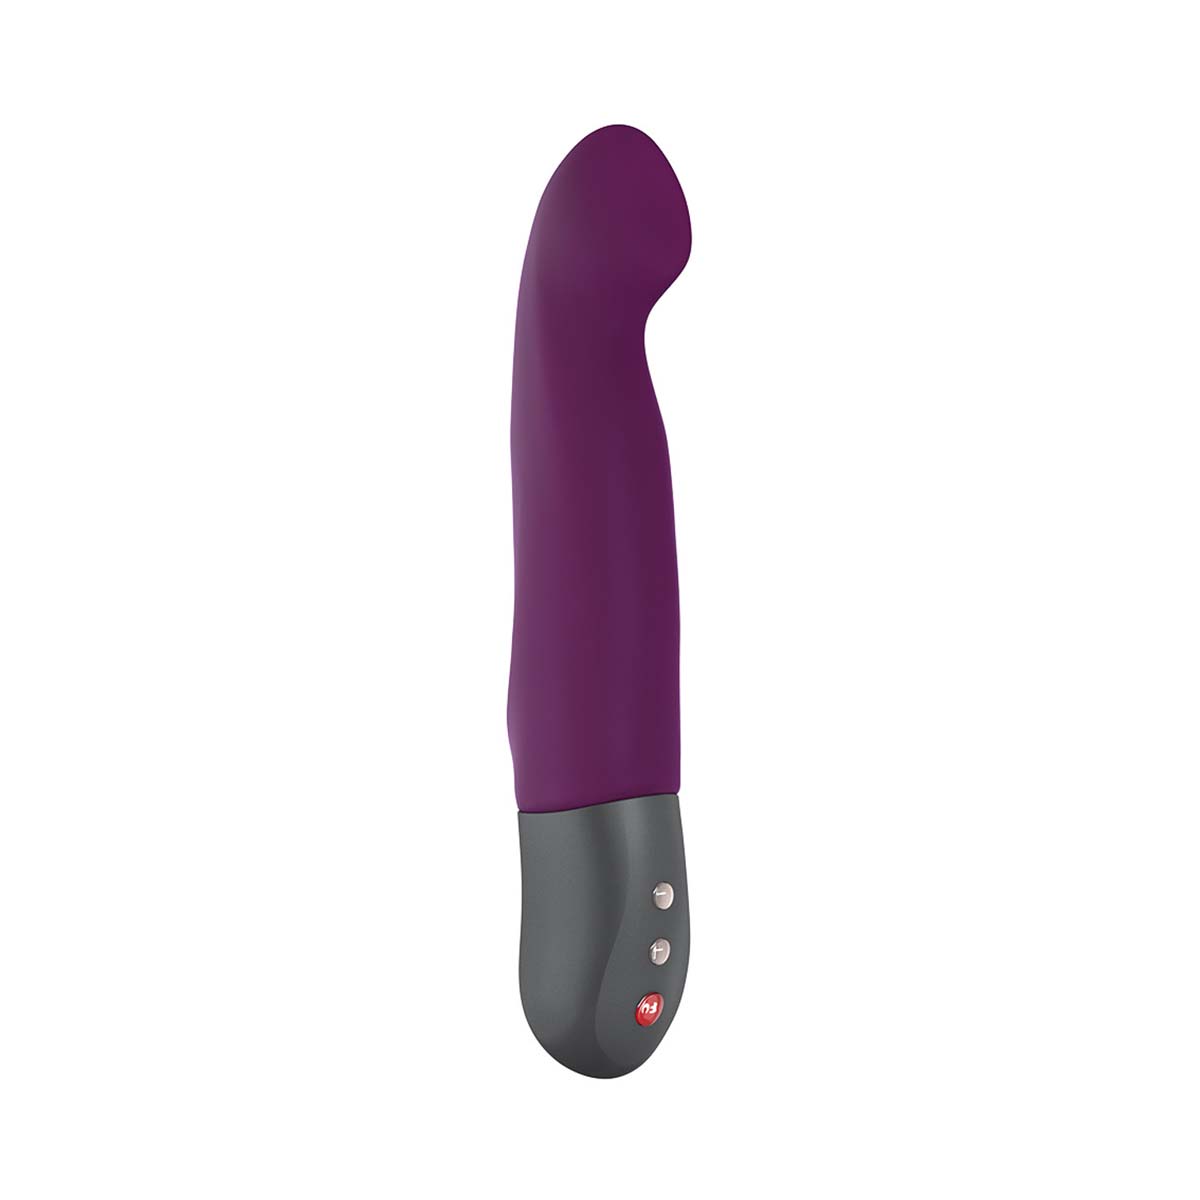 Purple Stronic G G-Spot thrusting vibrator with a grey handle and two buttons by Fun Factory over a white background Nudie Co